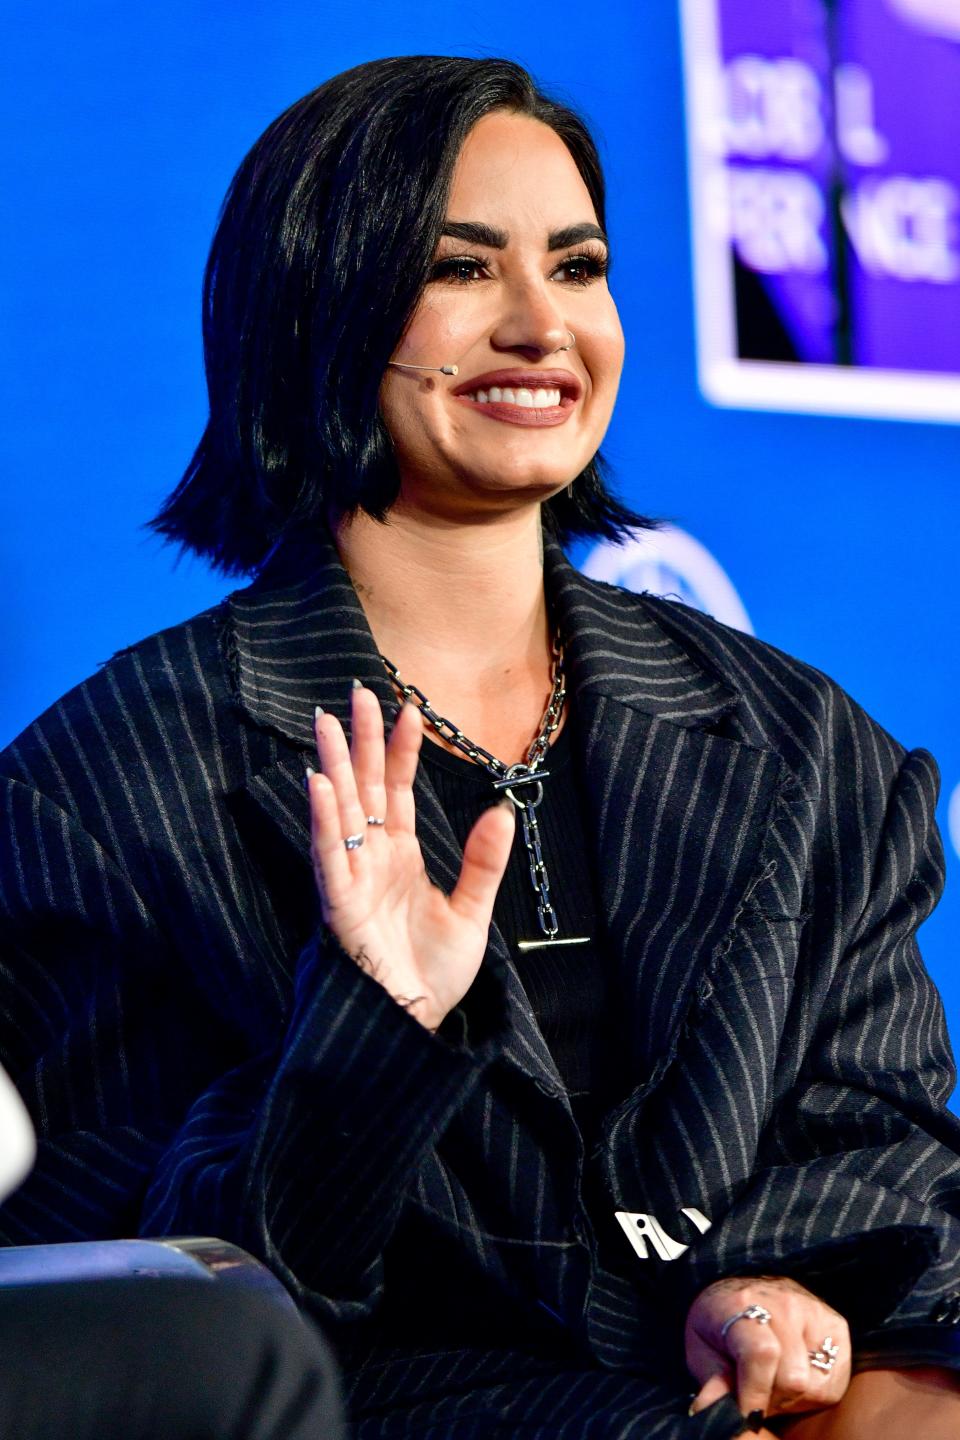 BEVERLY HILLS, CALIFORNIA - MAY 03: Demi Lovato attends the 2023 Milken Institute Global Conference at The Beverly Hilton on May 03, 2023 in Beverly Hills, California. (Photo by Jerod Harris/Getty Images) ORG XMIT: 775920230 ORIG FILE ID: 1487356207